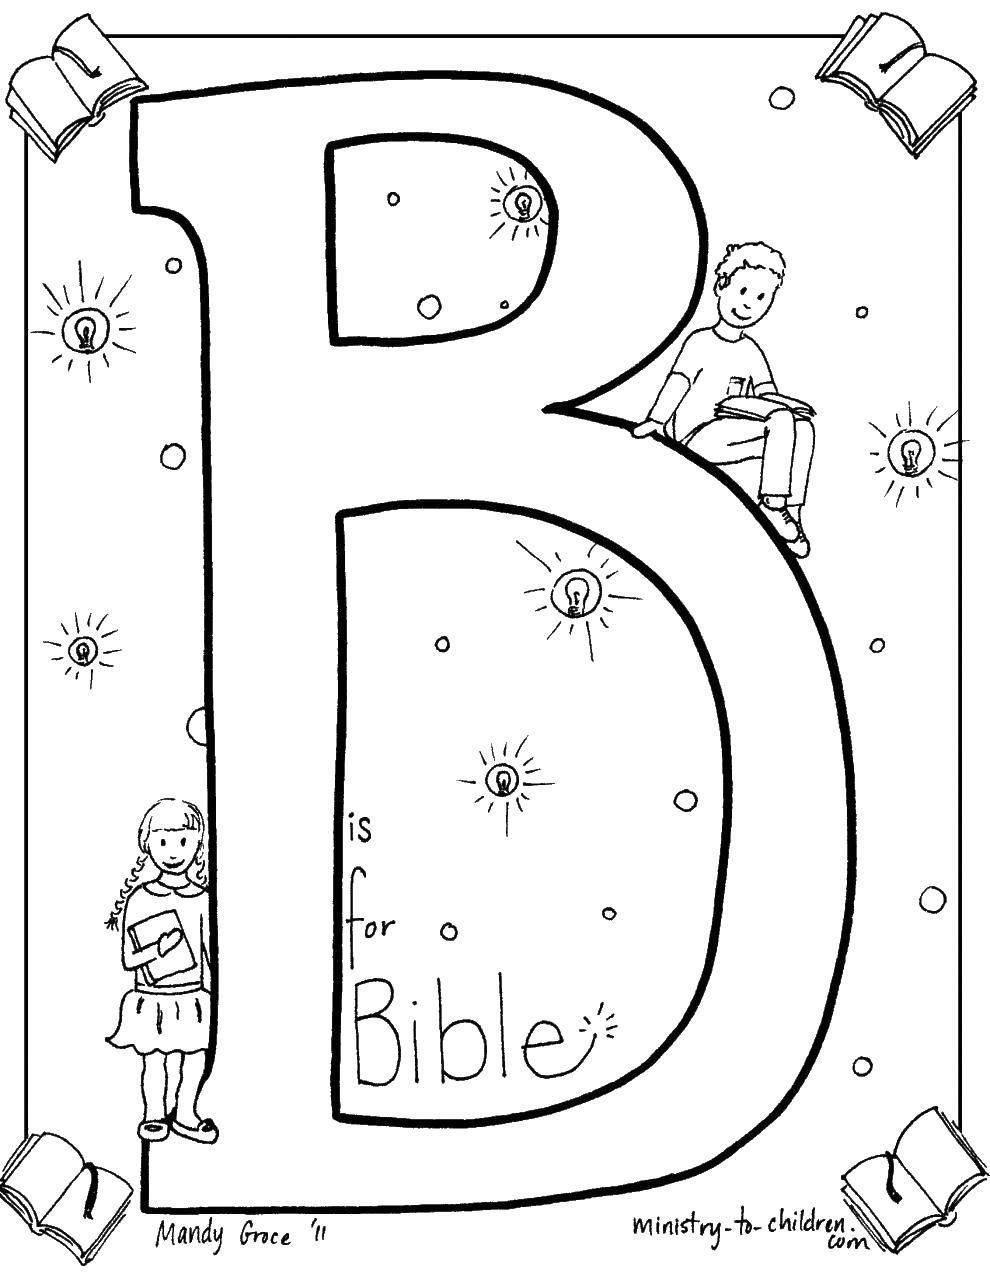 Coloring The Bible. Category the Bible. Tags:  the book, the Bible, religion.